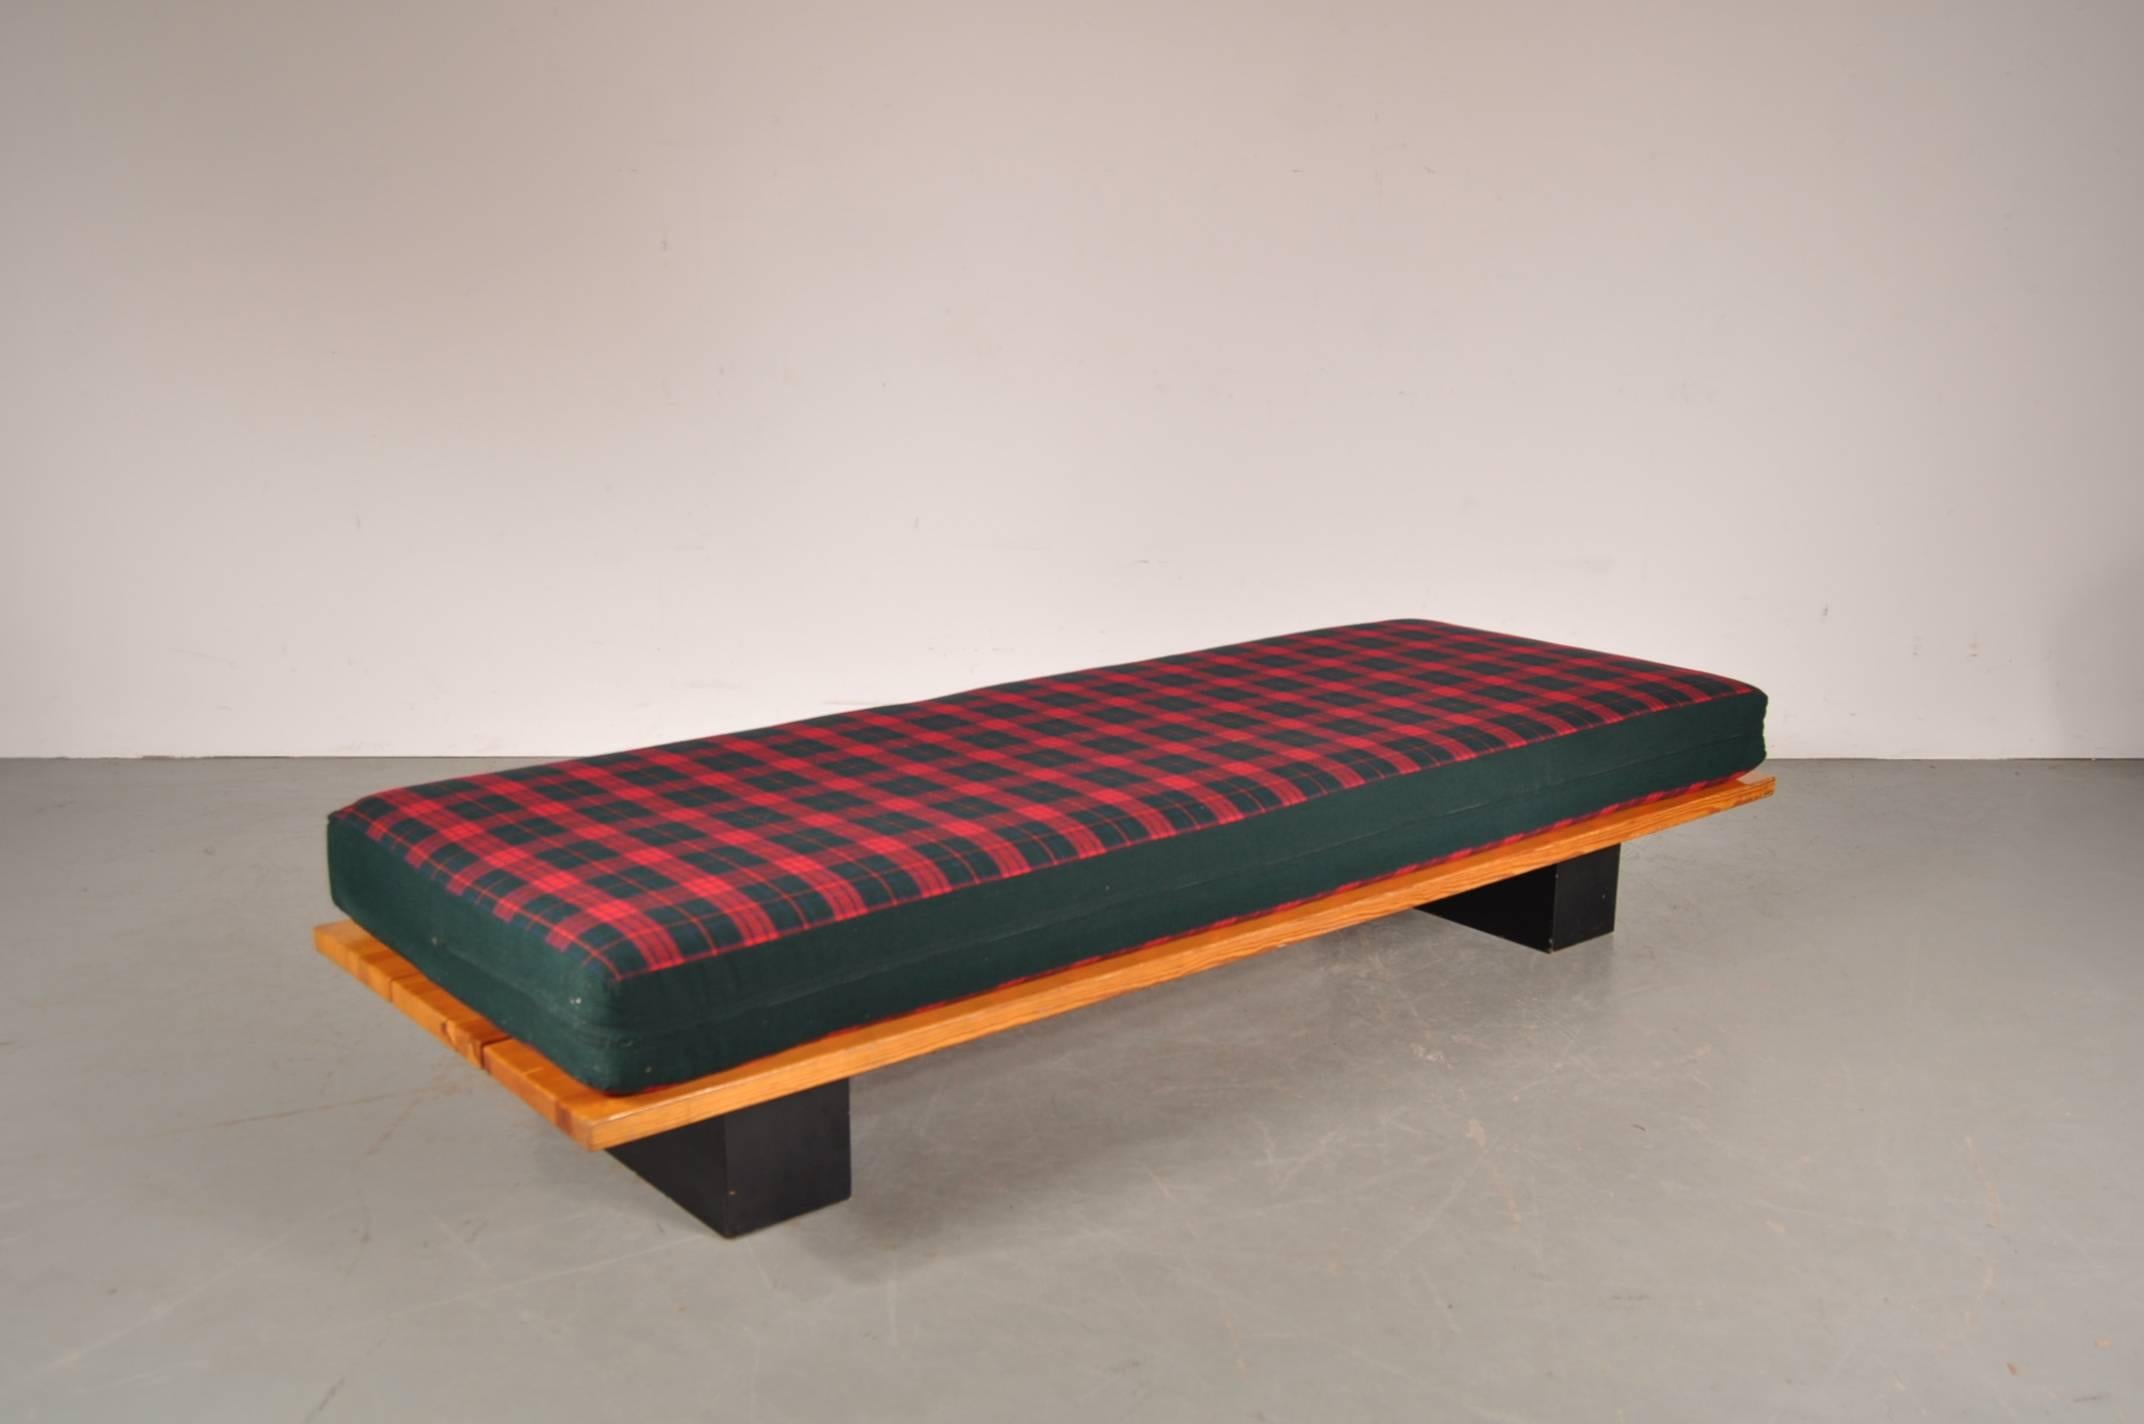 Unique wooden daybed or coffee table, manufactured by Laukaan Puu, Finland, circa 1950.

It has a two-toned base: The seat or top is made of beautiful pine wood and the legs are made of black lacquered wood. On it's own it can be used as a coffee